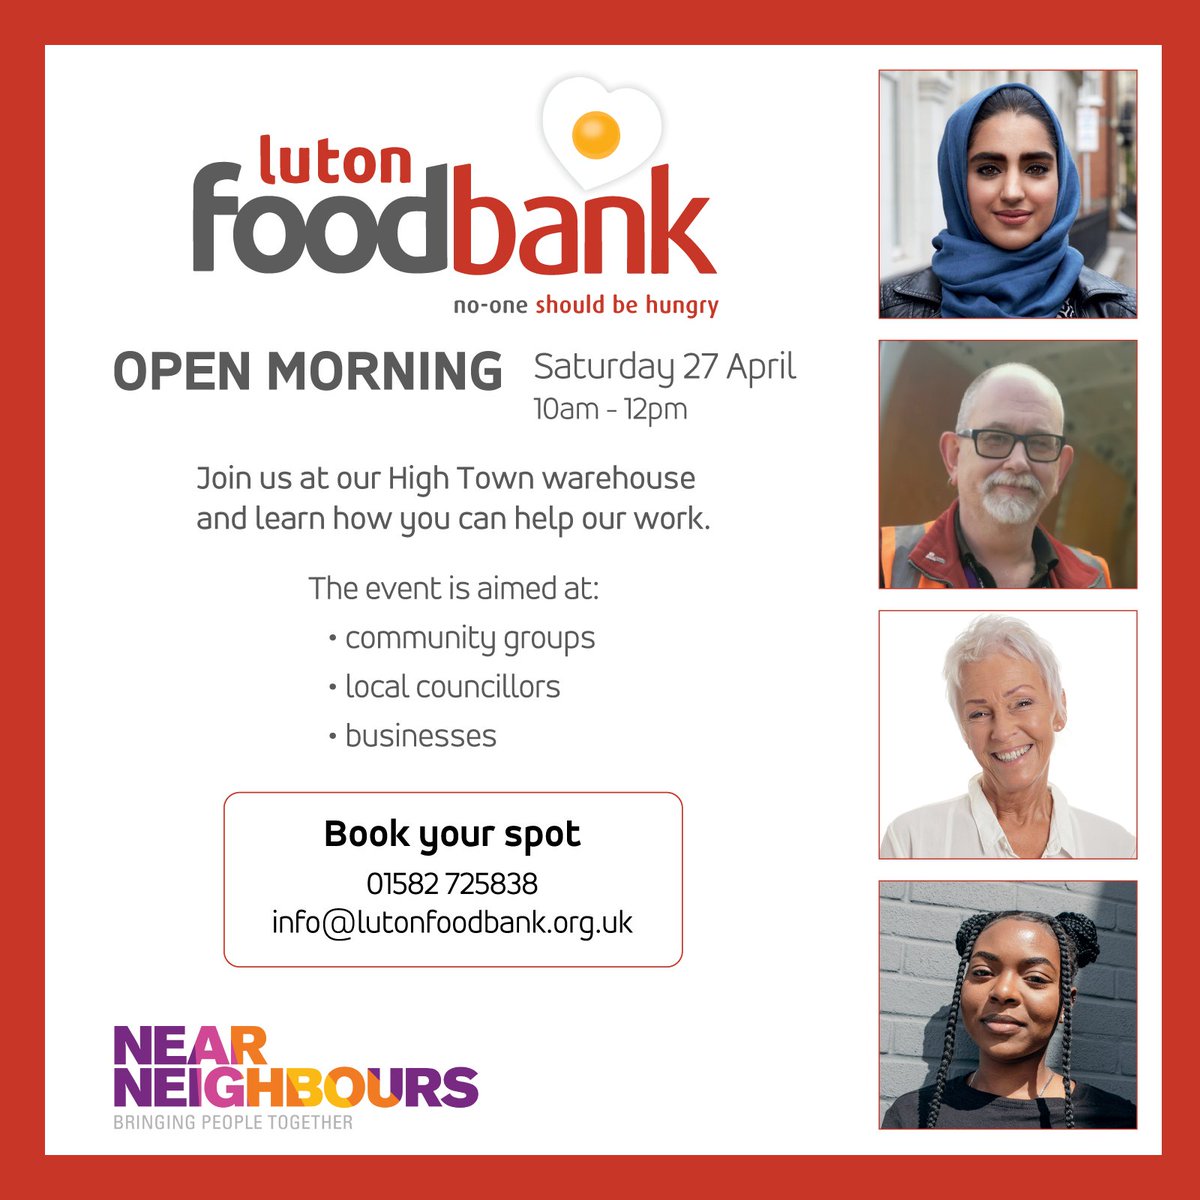 We will be hosting events in the coming weeks to enable people to see our warehouse and learn more about supporting our work. Contact us on info@lutonfoodbank.org.uk to book your spot.